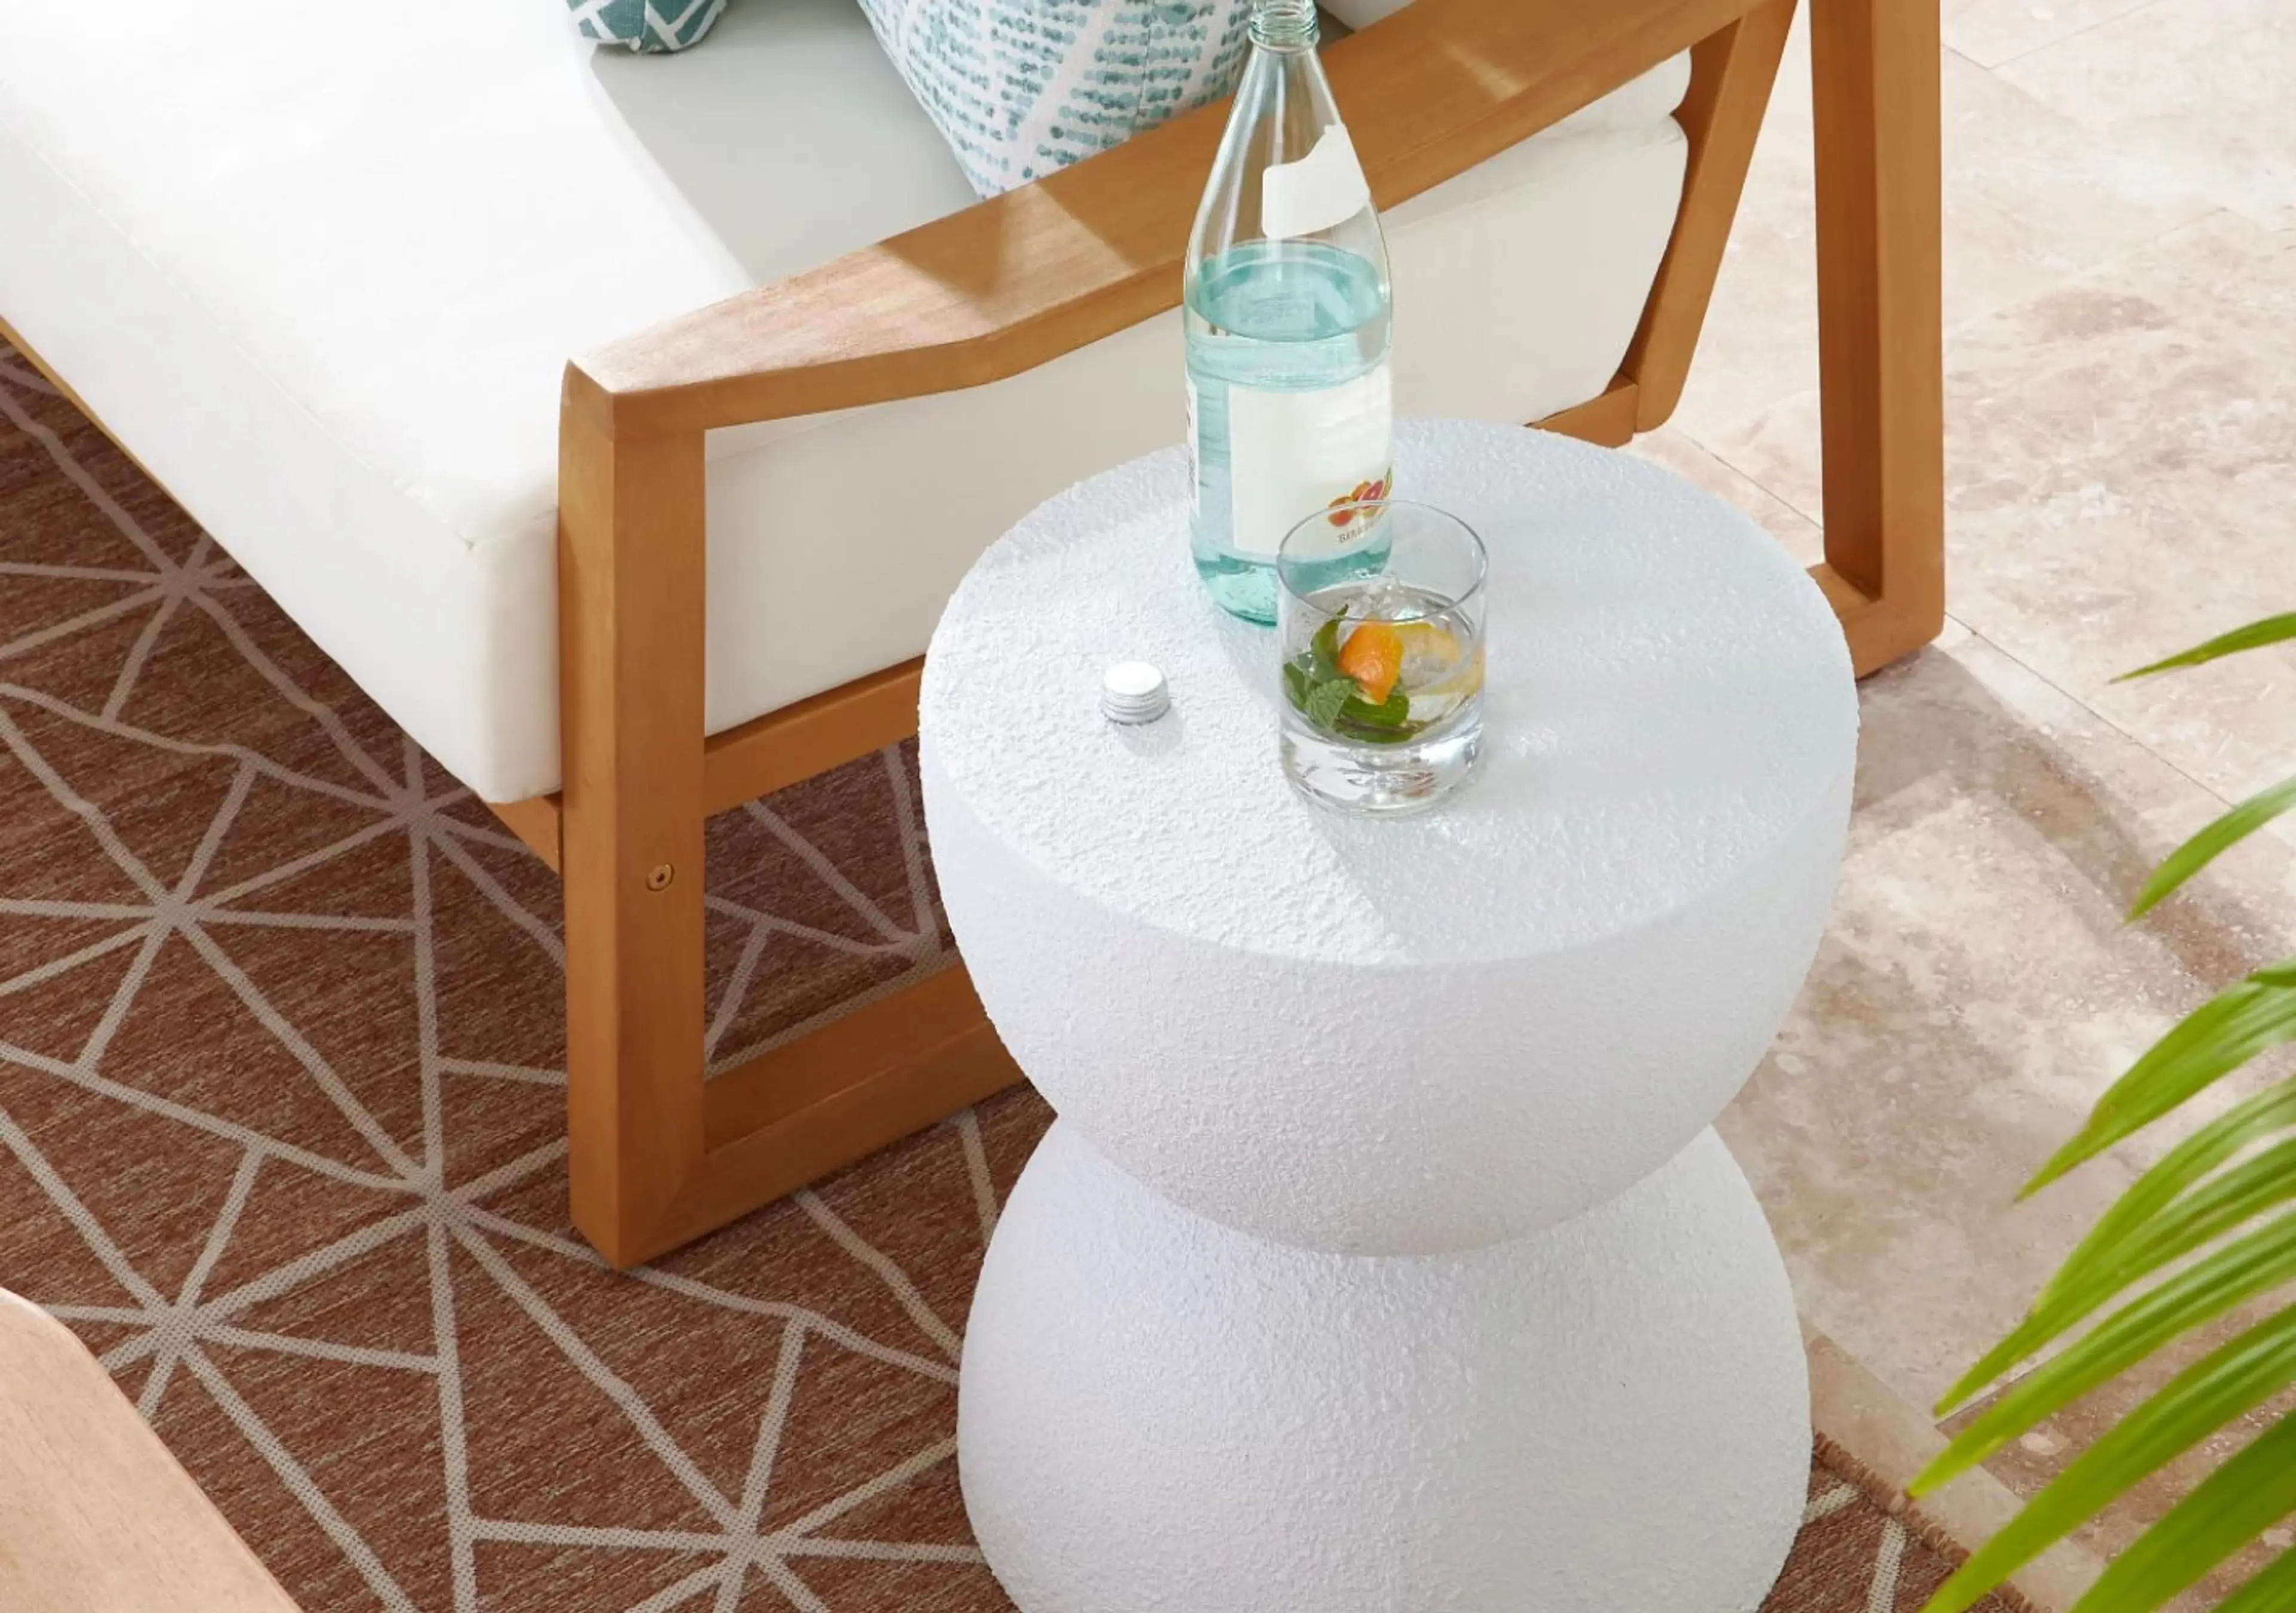 4. Fun Accent Table